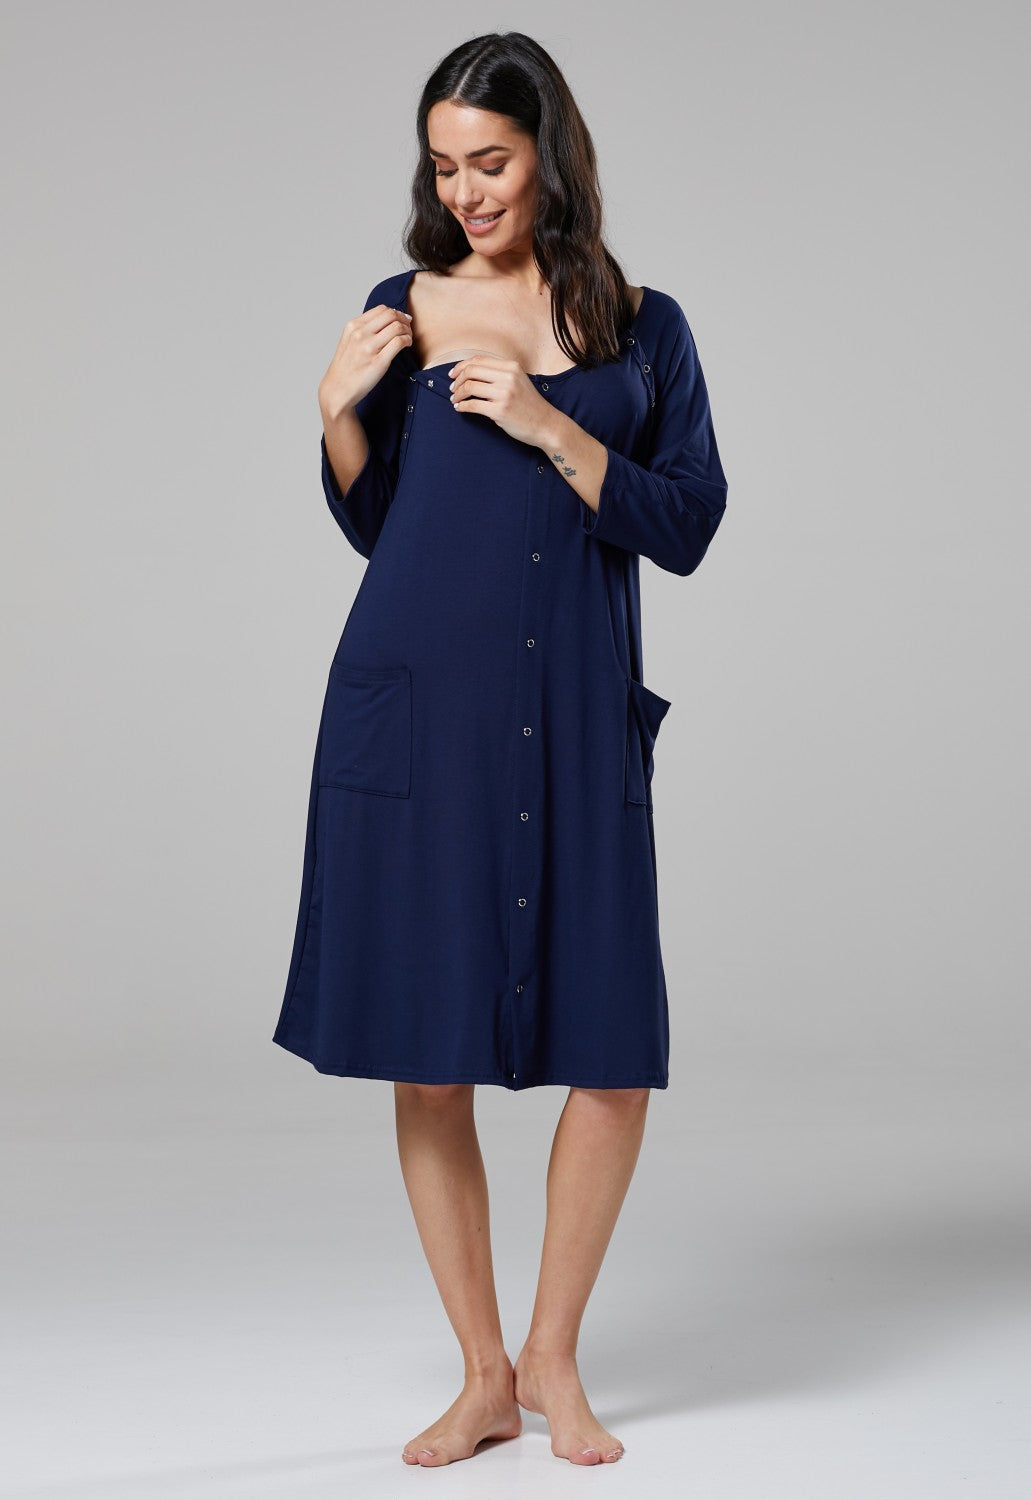 Geek Chic Maternity: Maternity Robes & Delivery Gowns – Fashionably Nerdy